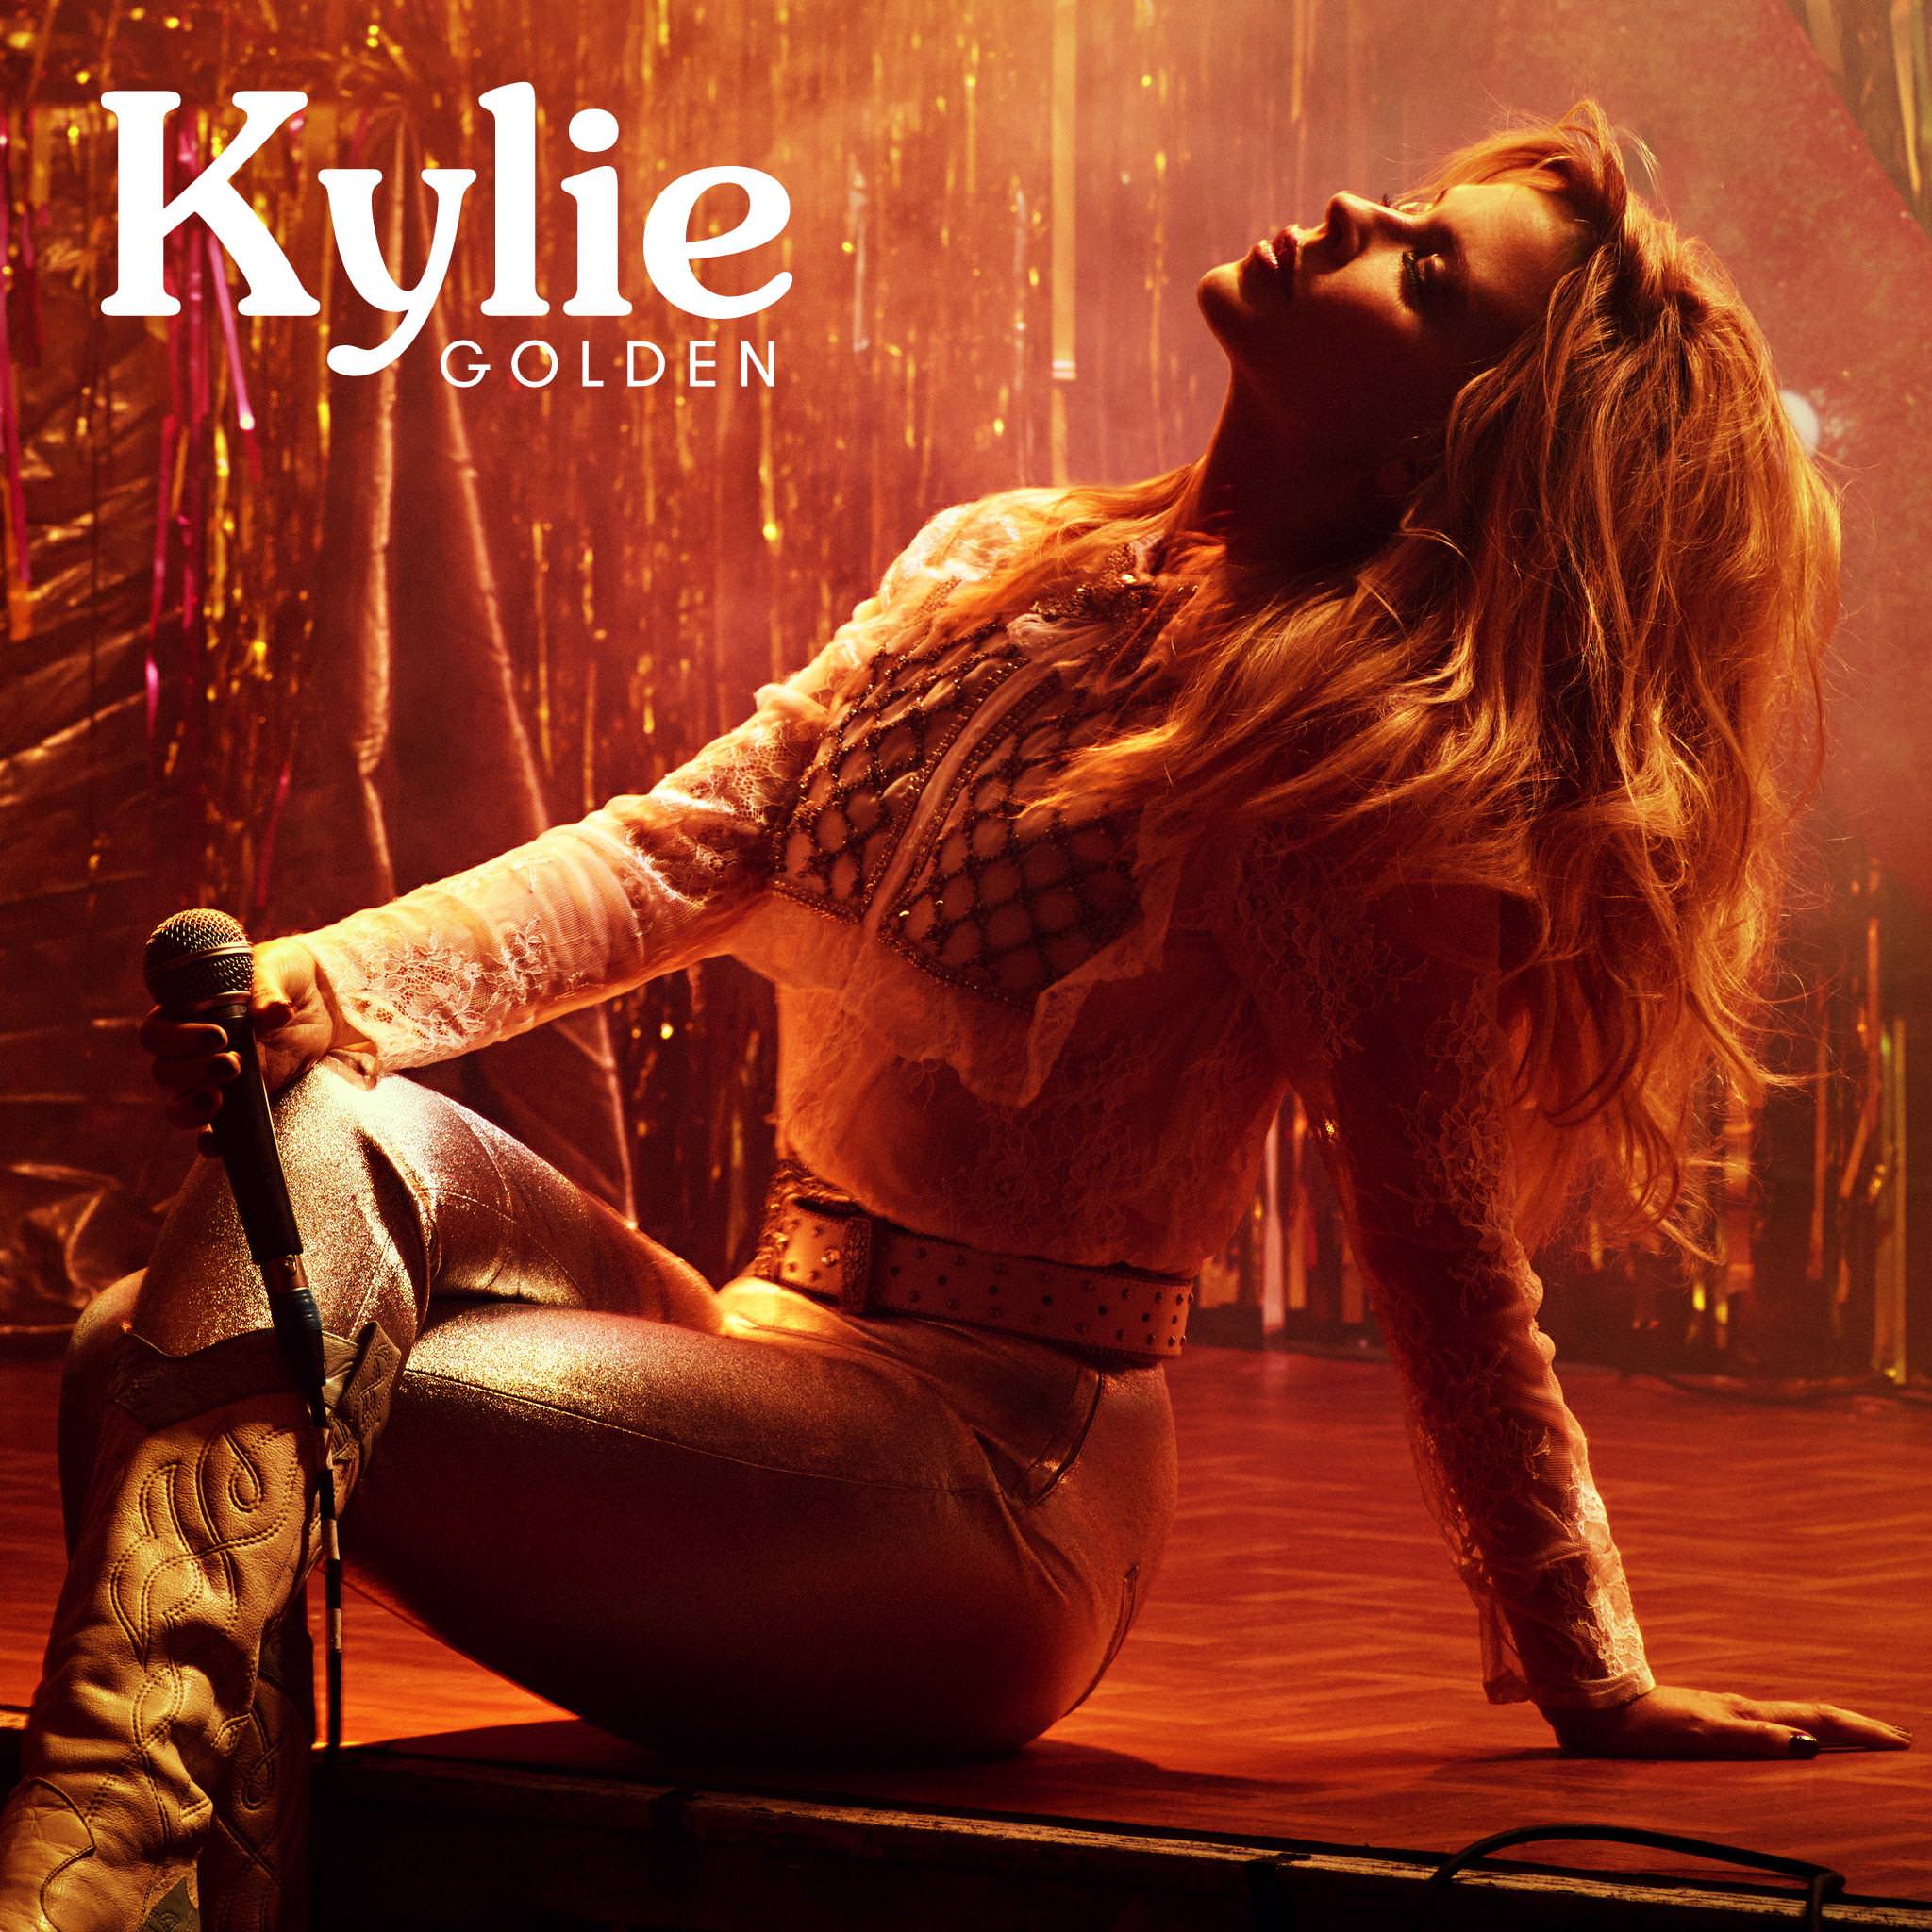 kylie-minogue-golden-style-and-life-by-susana